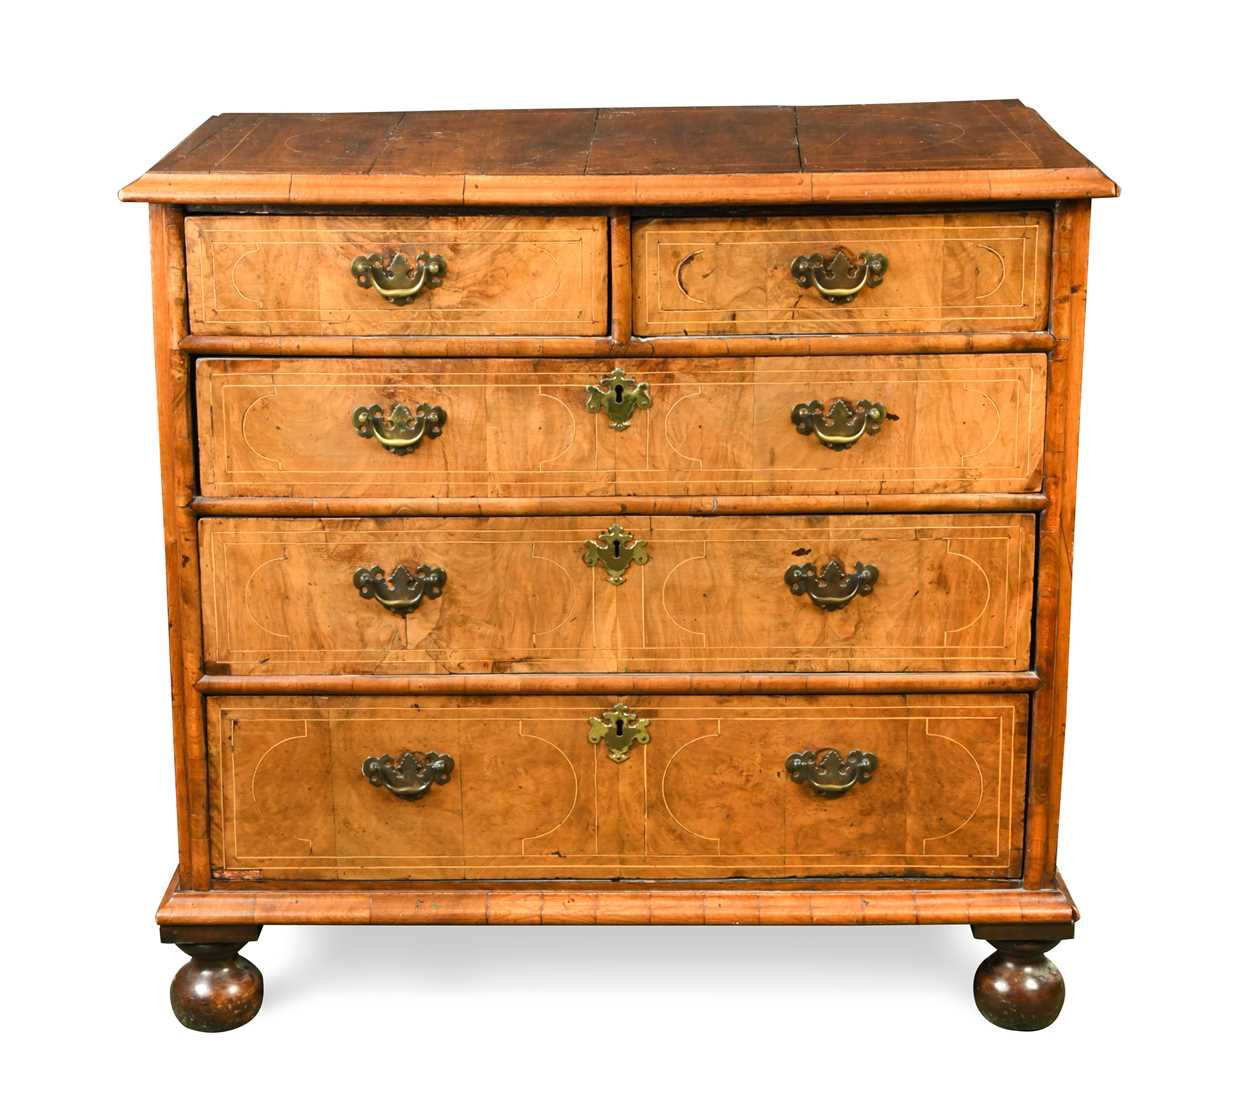 A walnut and boxwood line inlaid chest of drawers, early 18th century,